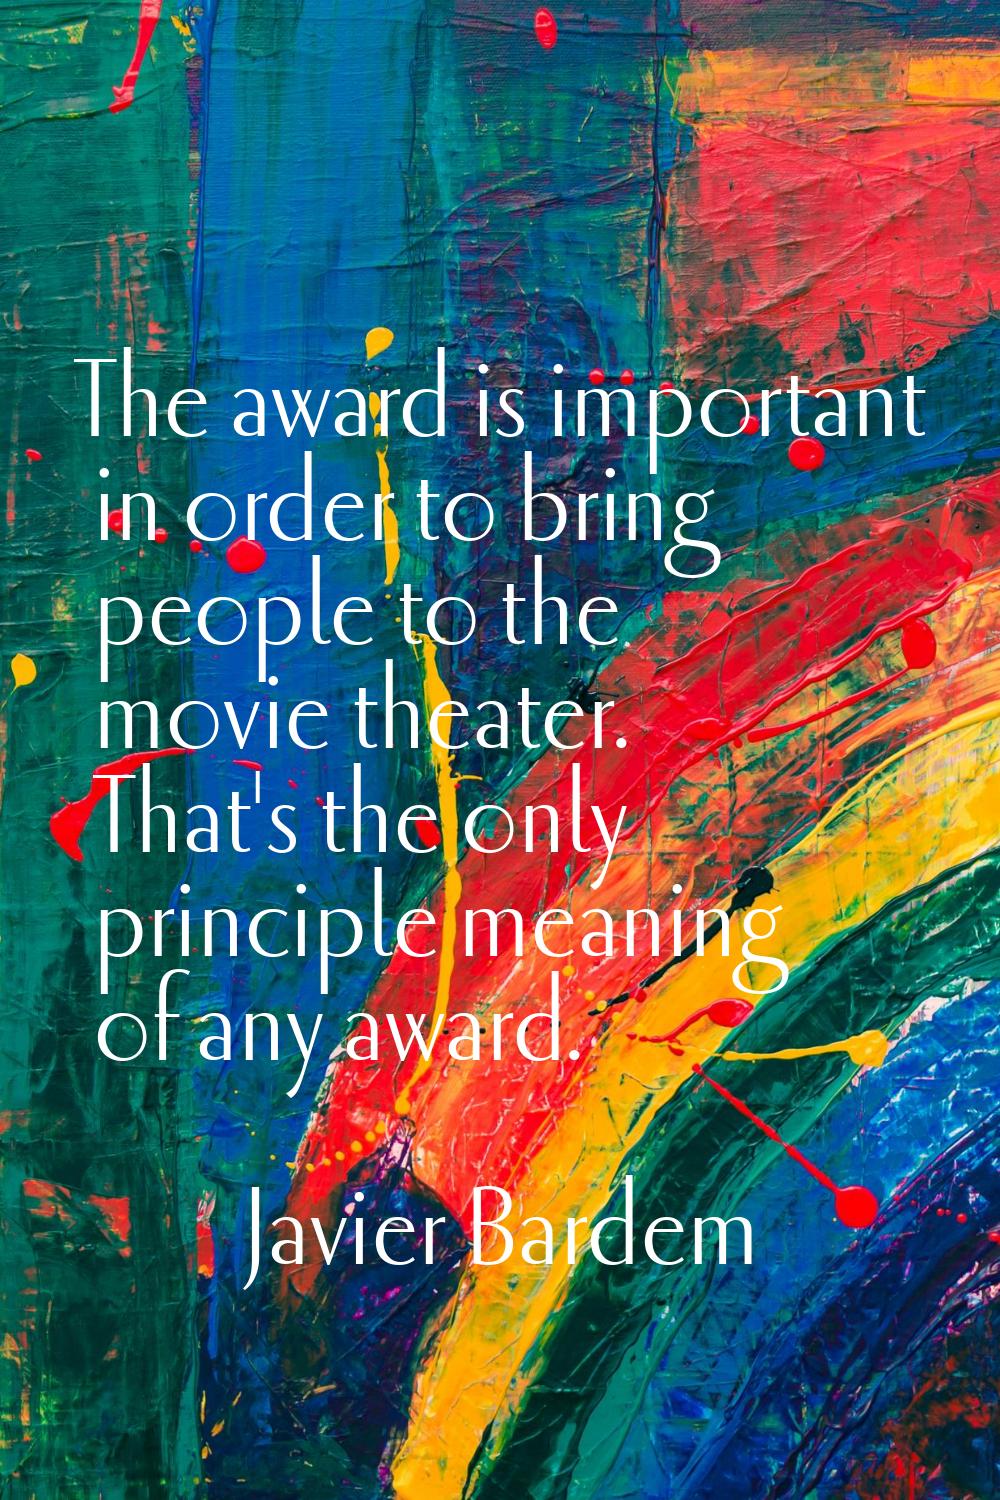 The award is important in order to bring people to the movie theater. That's the only principle mea